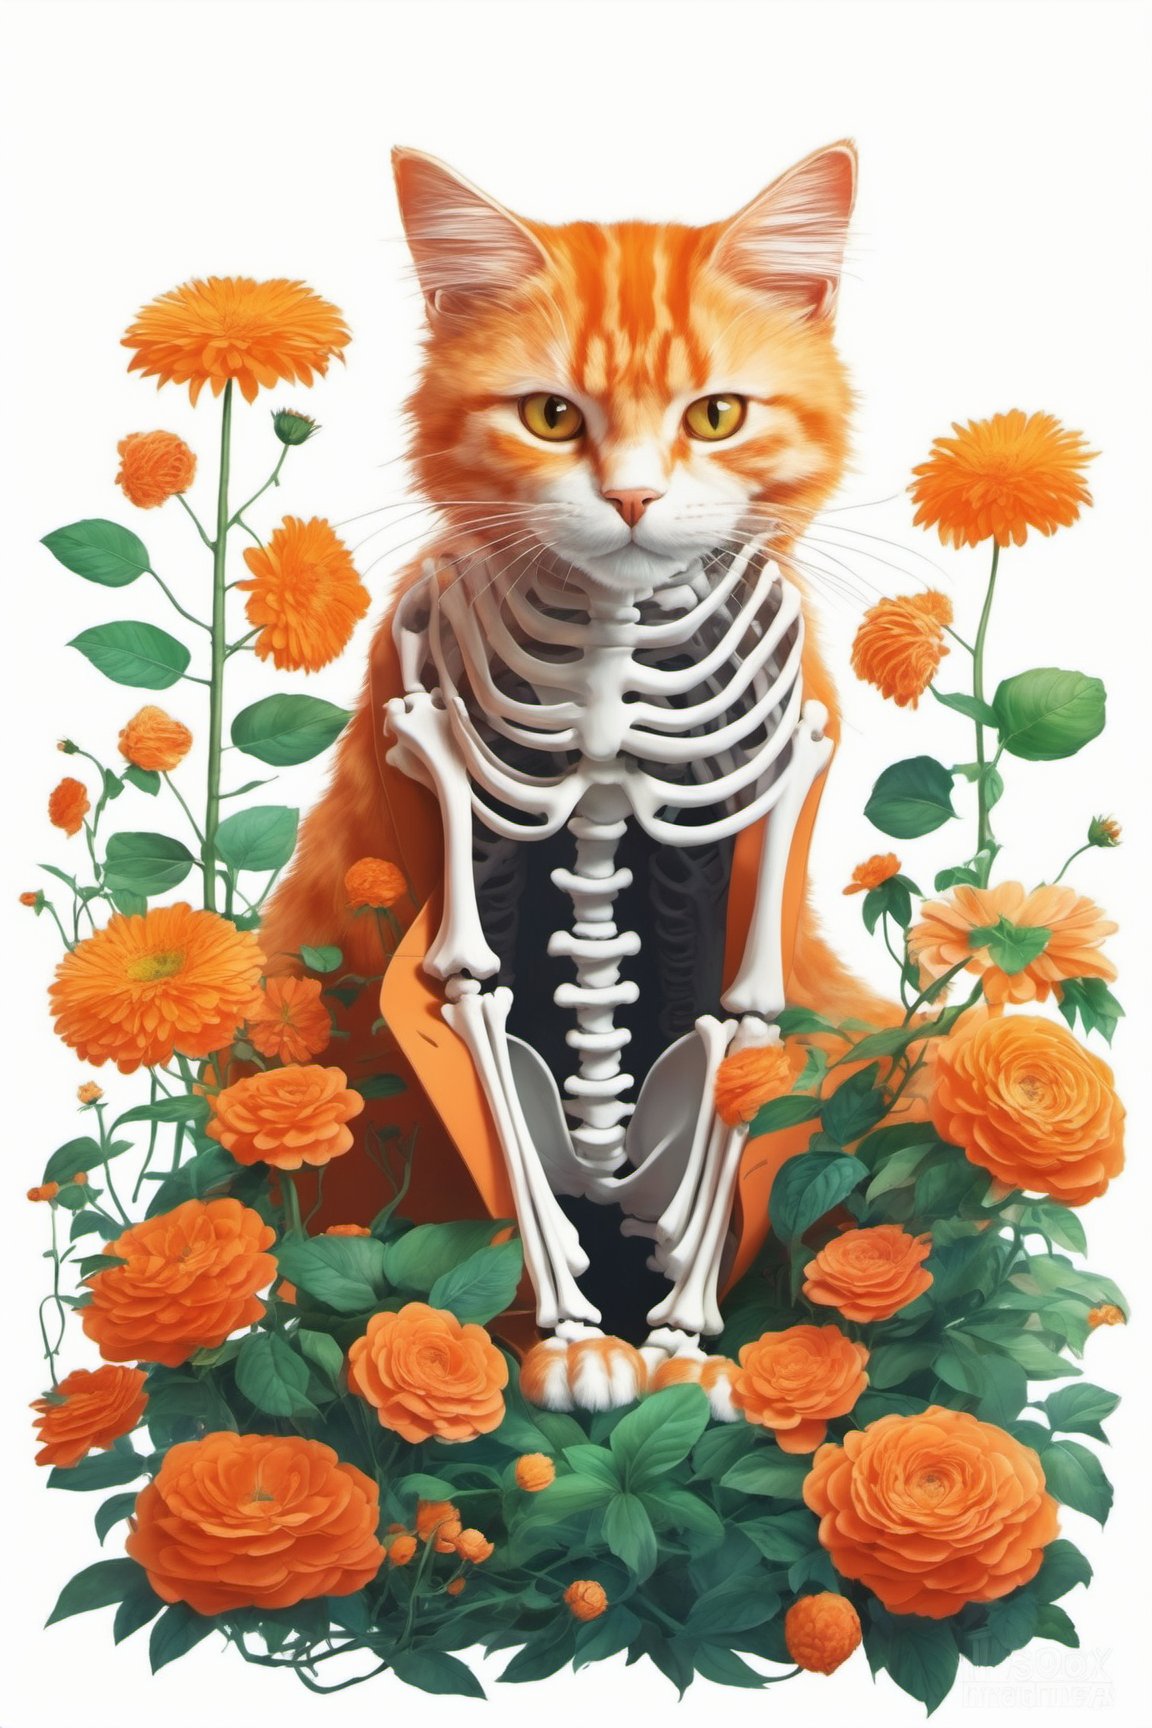 style by Michael Page, concept art fluffy orange cat skeleton in a blooming garden isolated by white background, fantastic plants . digital artwork, illustrative, painterly, matte painting, highly detailed, by IrinaKapi